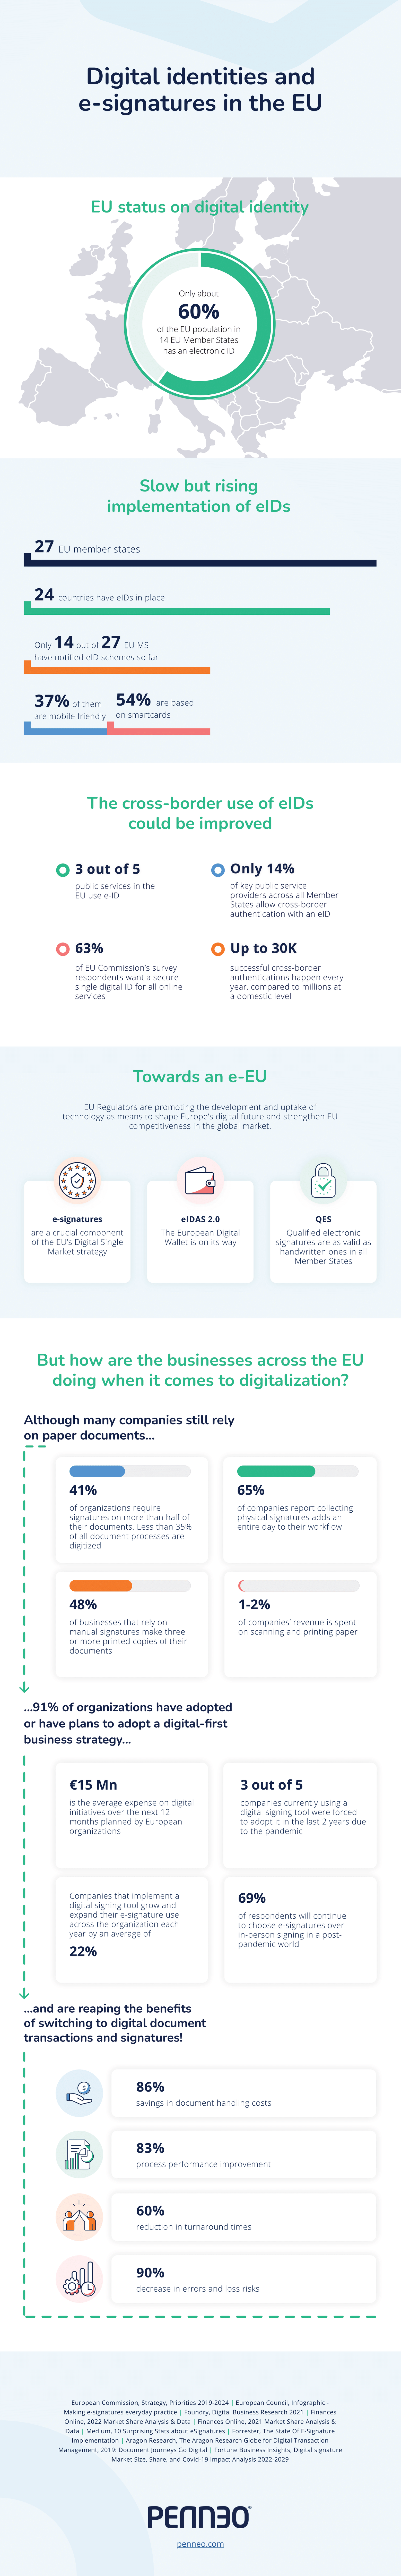 Infographic: Digital identities and e-signatures in the EU